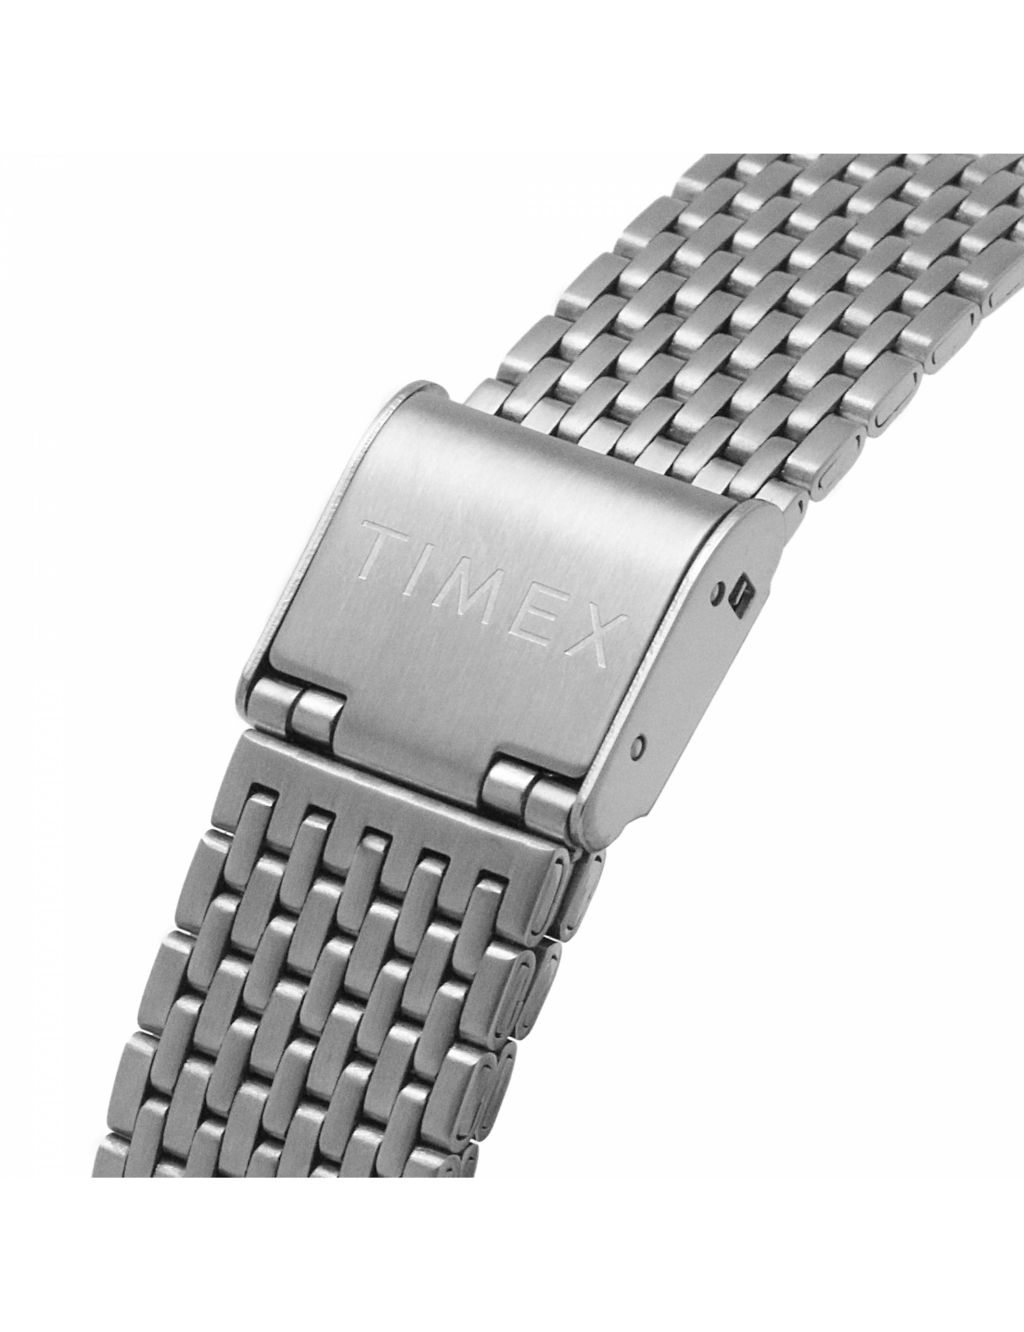 Timex Q Falcon Eye Stainless Steel Watch image 6